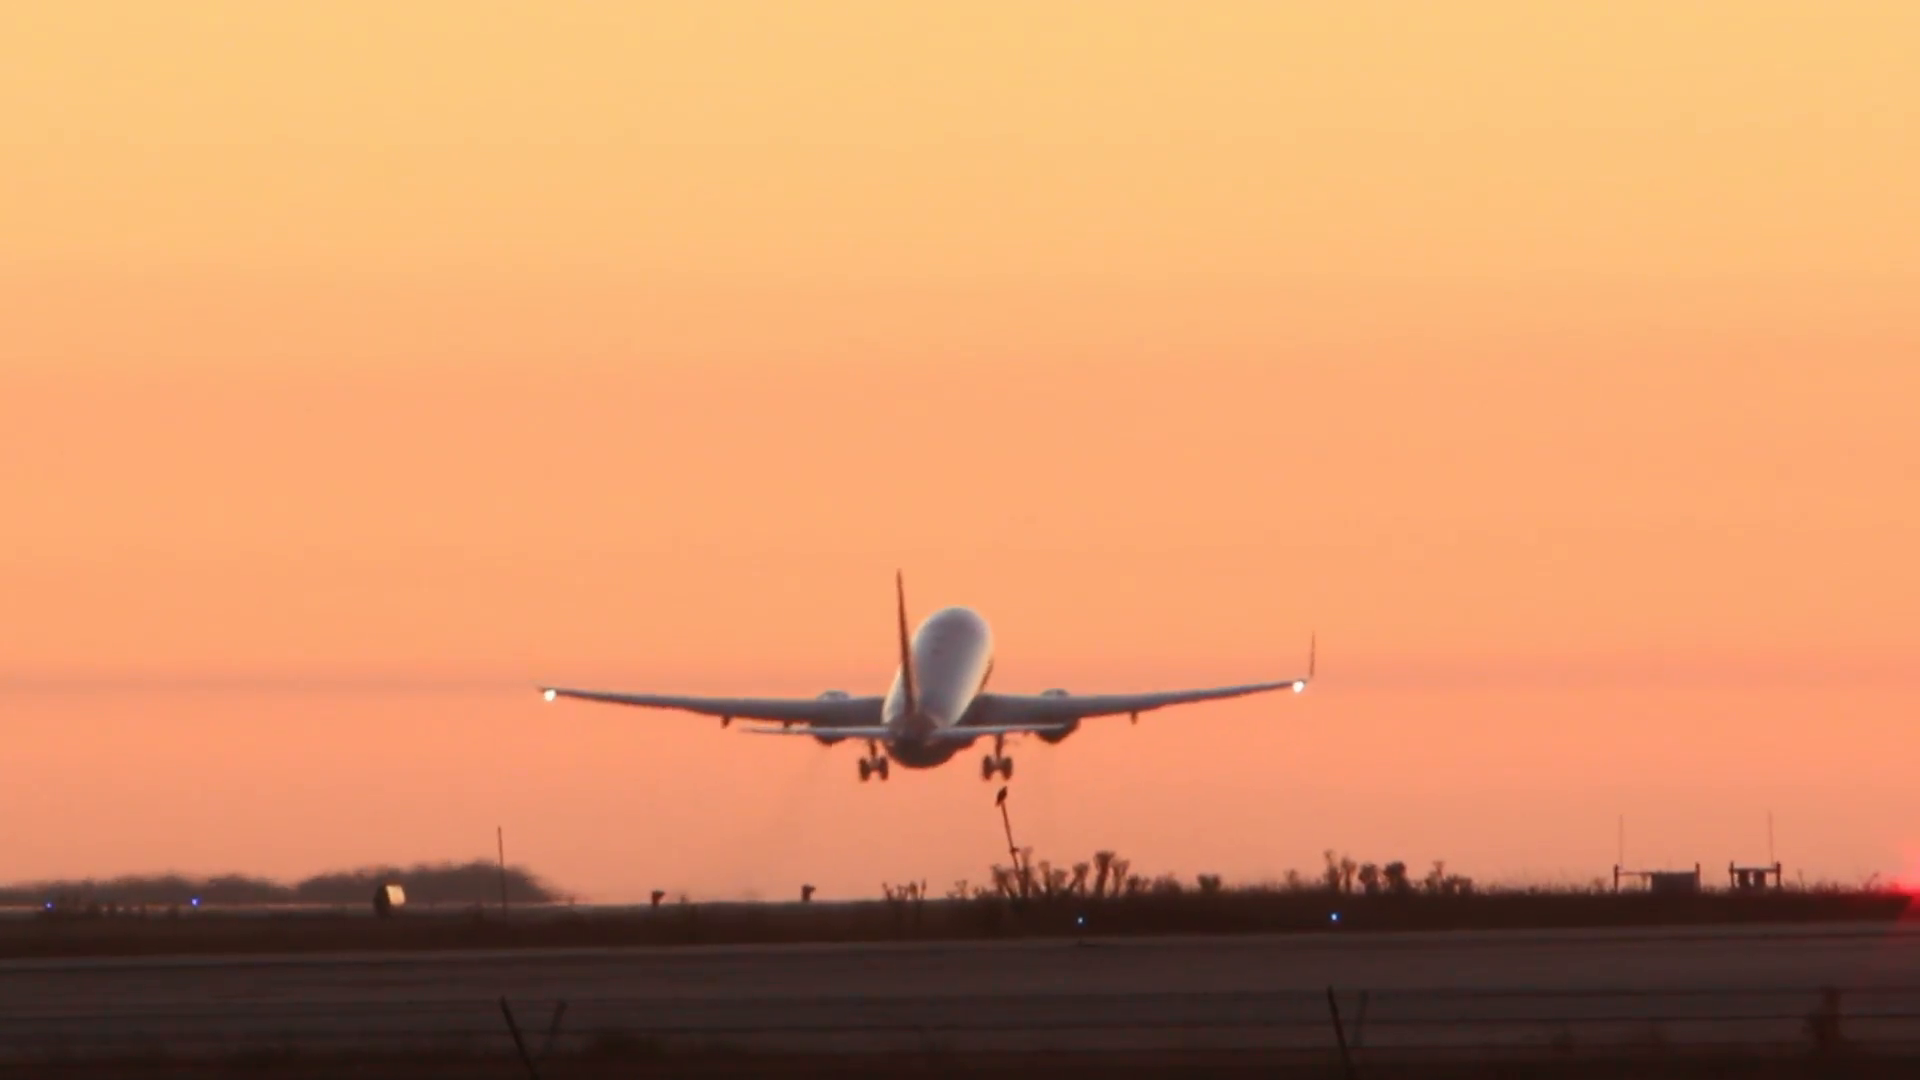 HD footage of a twin engine plane taking off in silhouette against ...